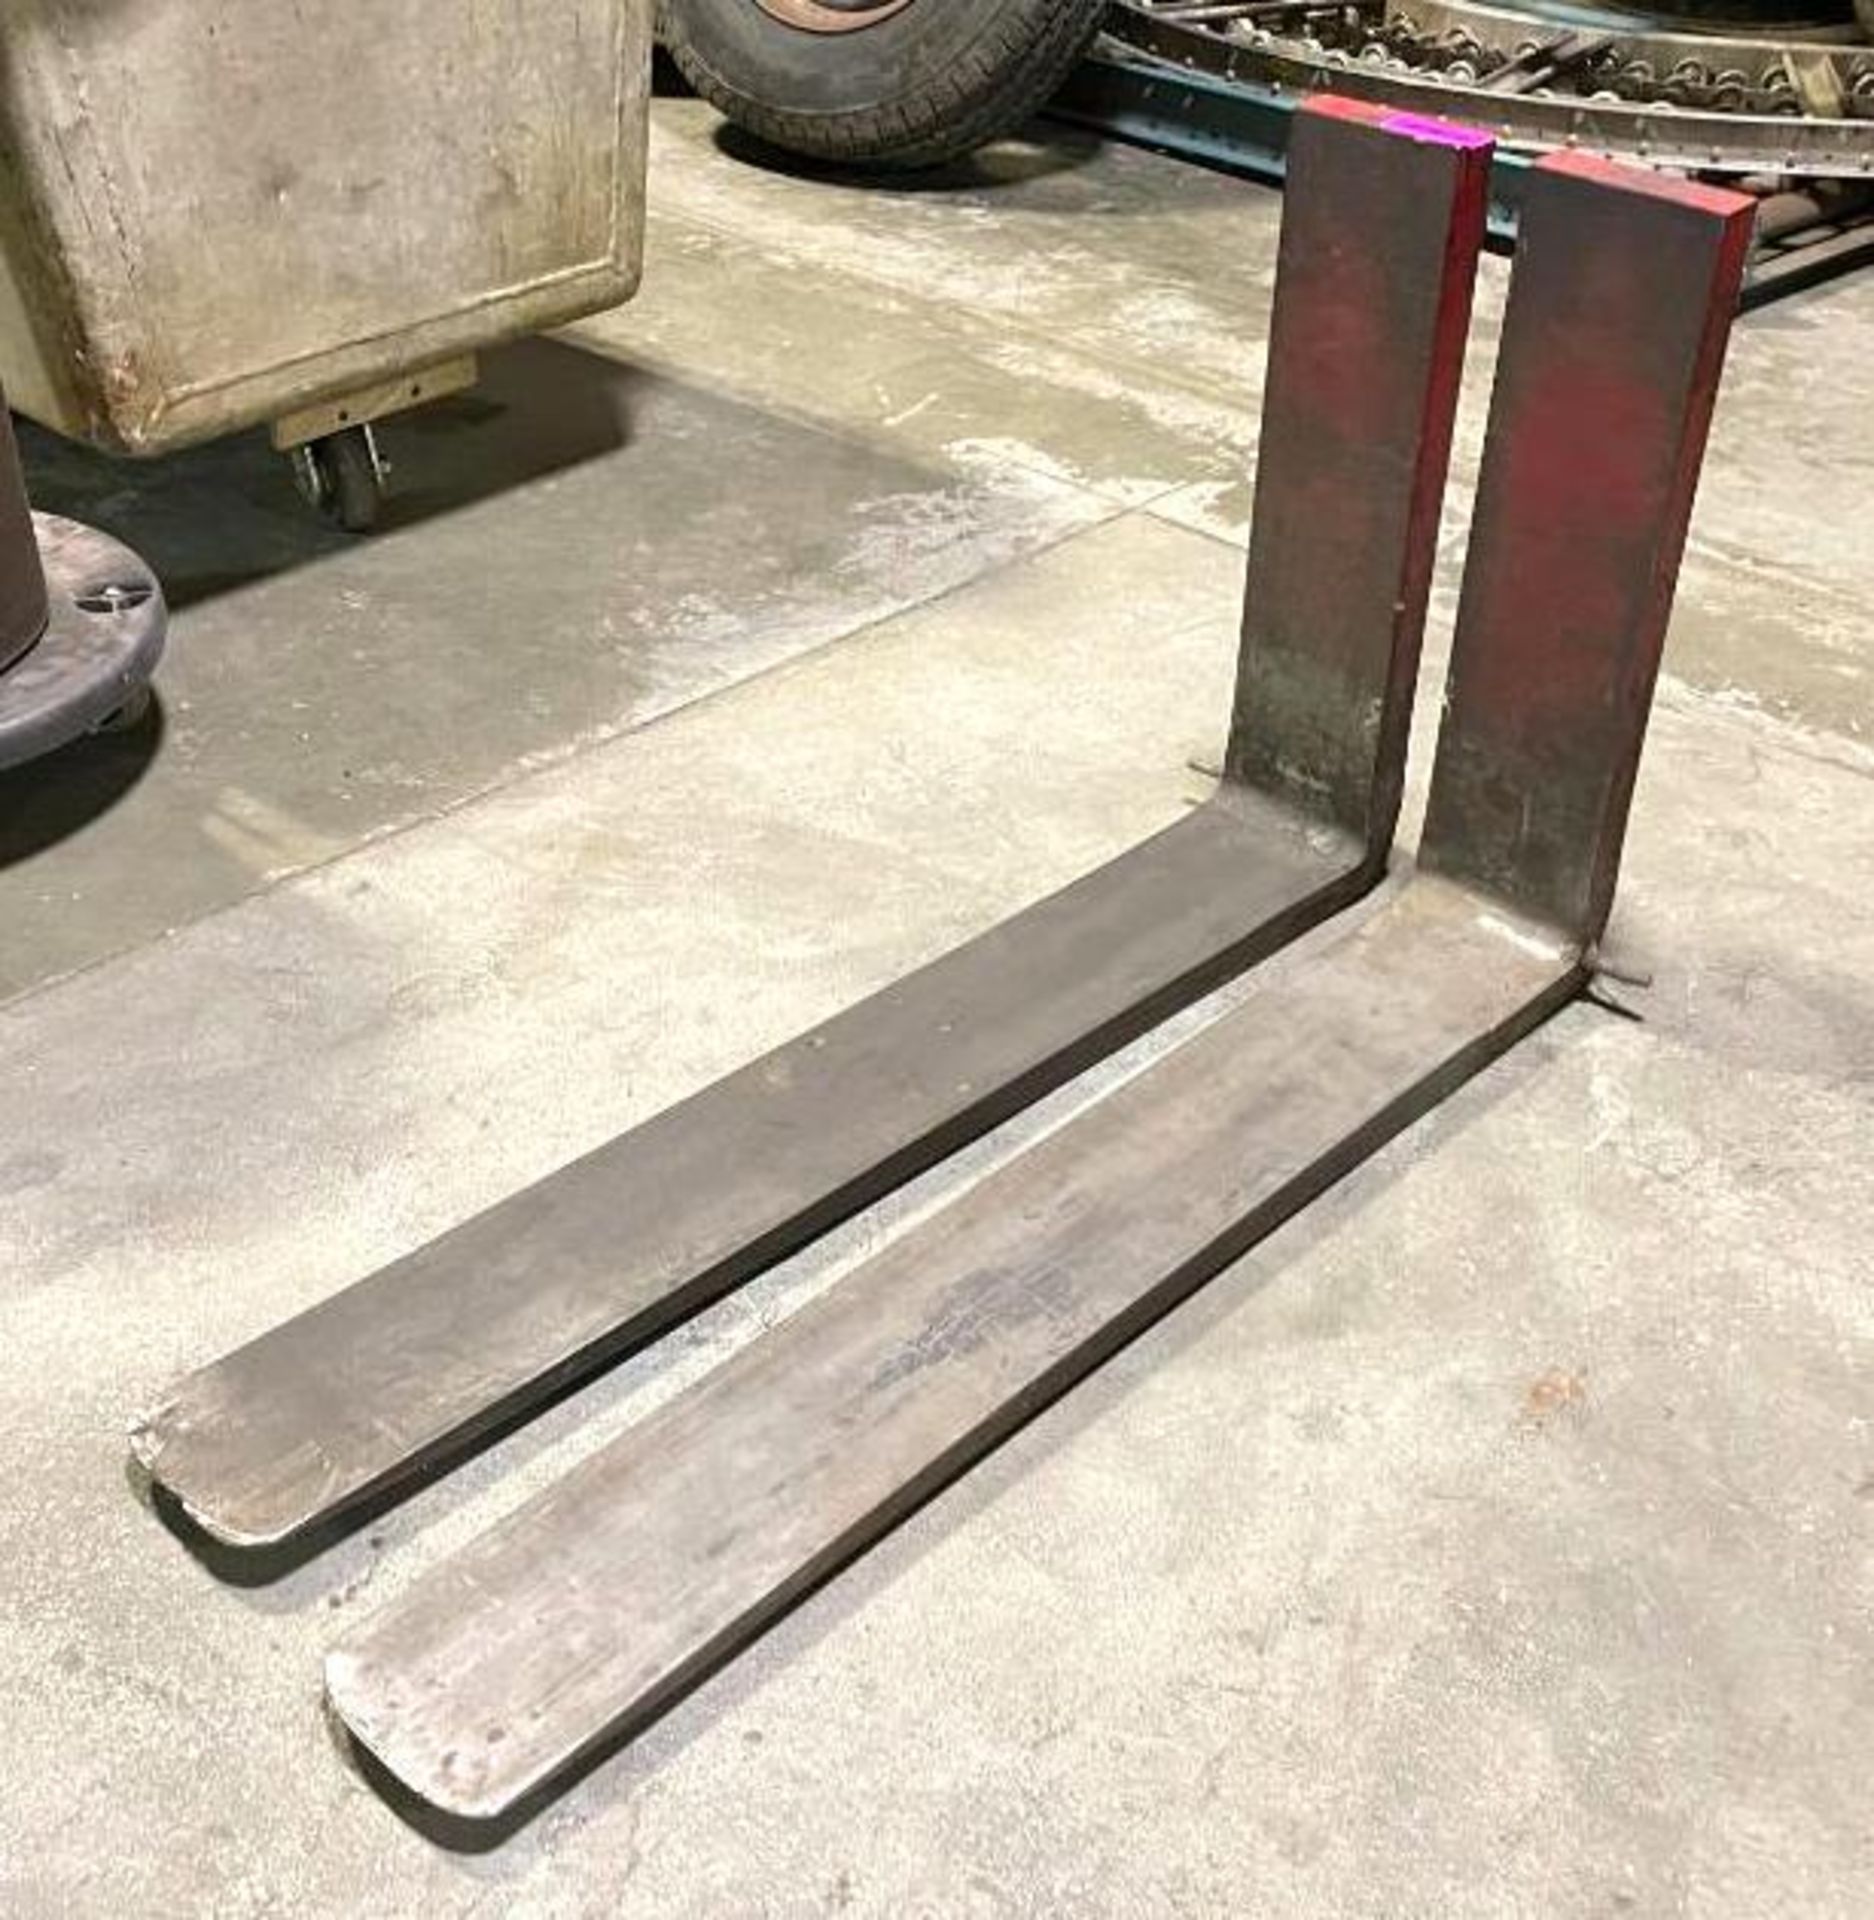 36" X 5" FORKLIFT FORKS (PAIR) SIZE: 36" X 5" QTY: 1